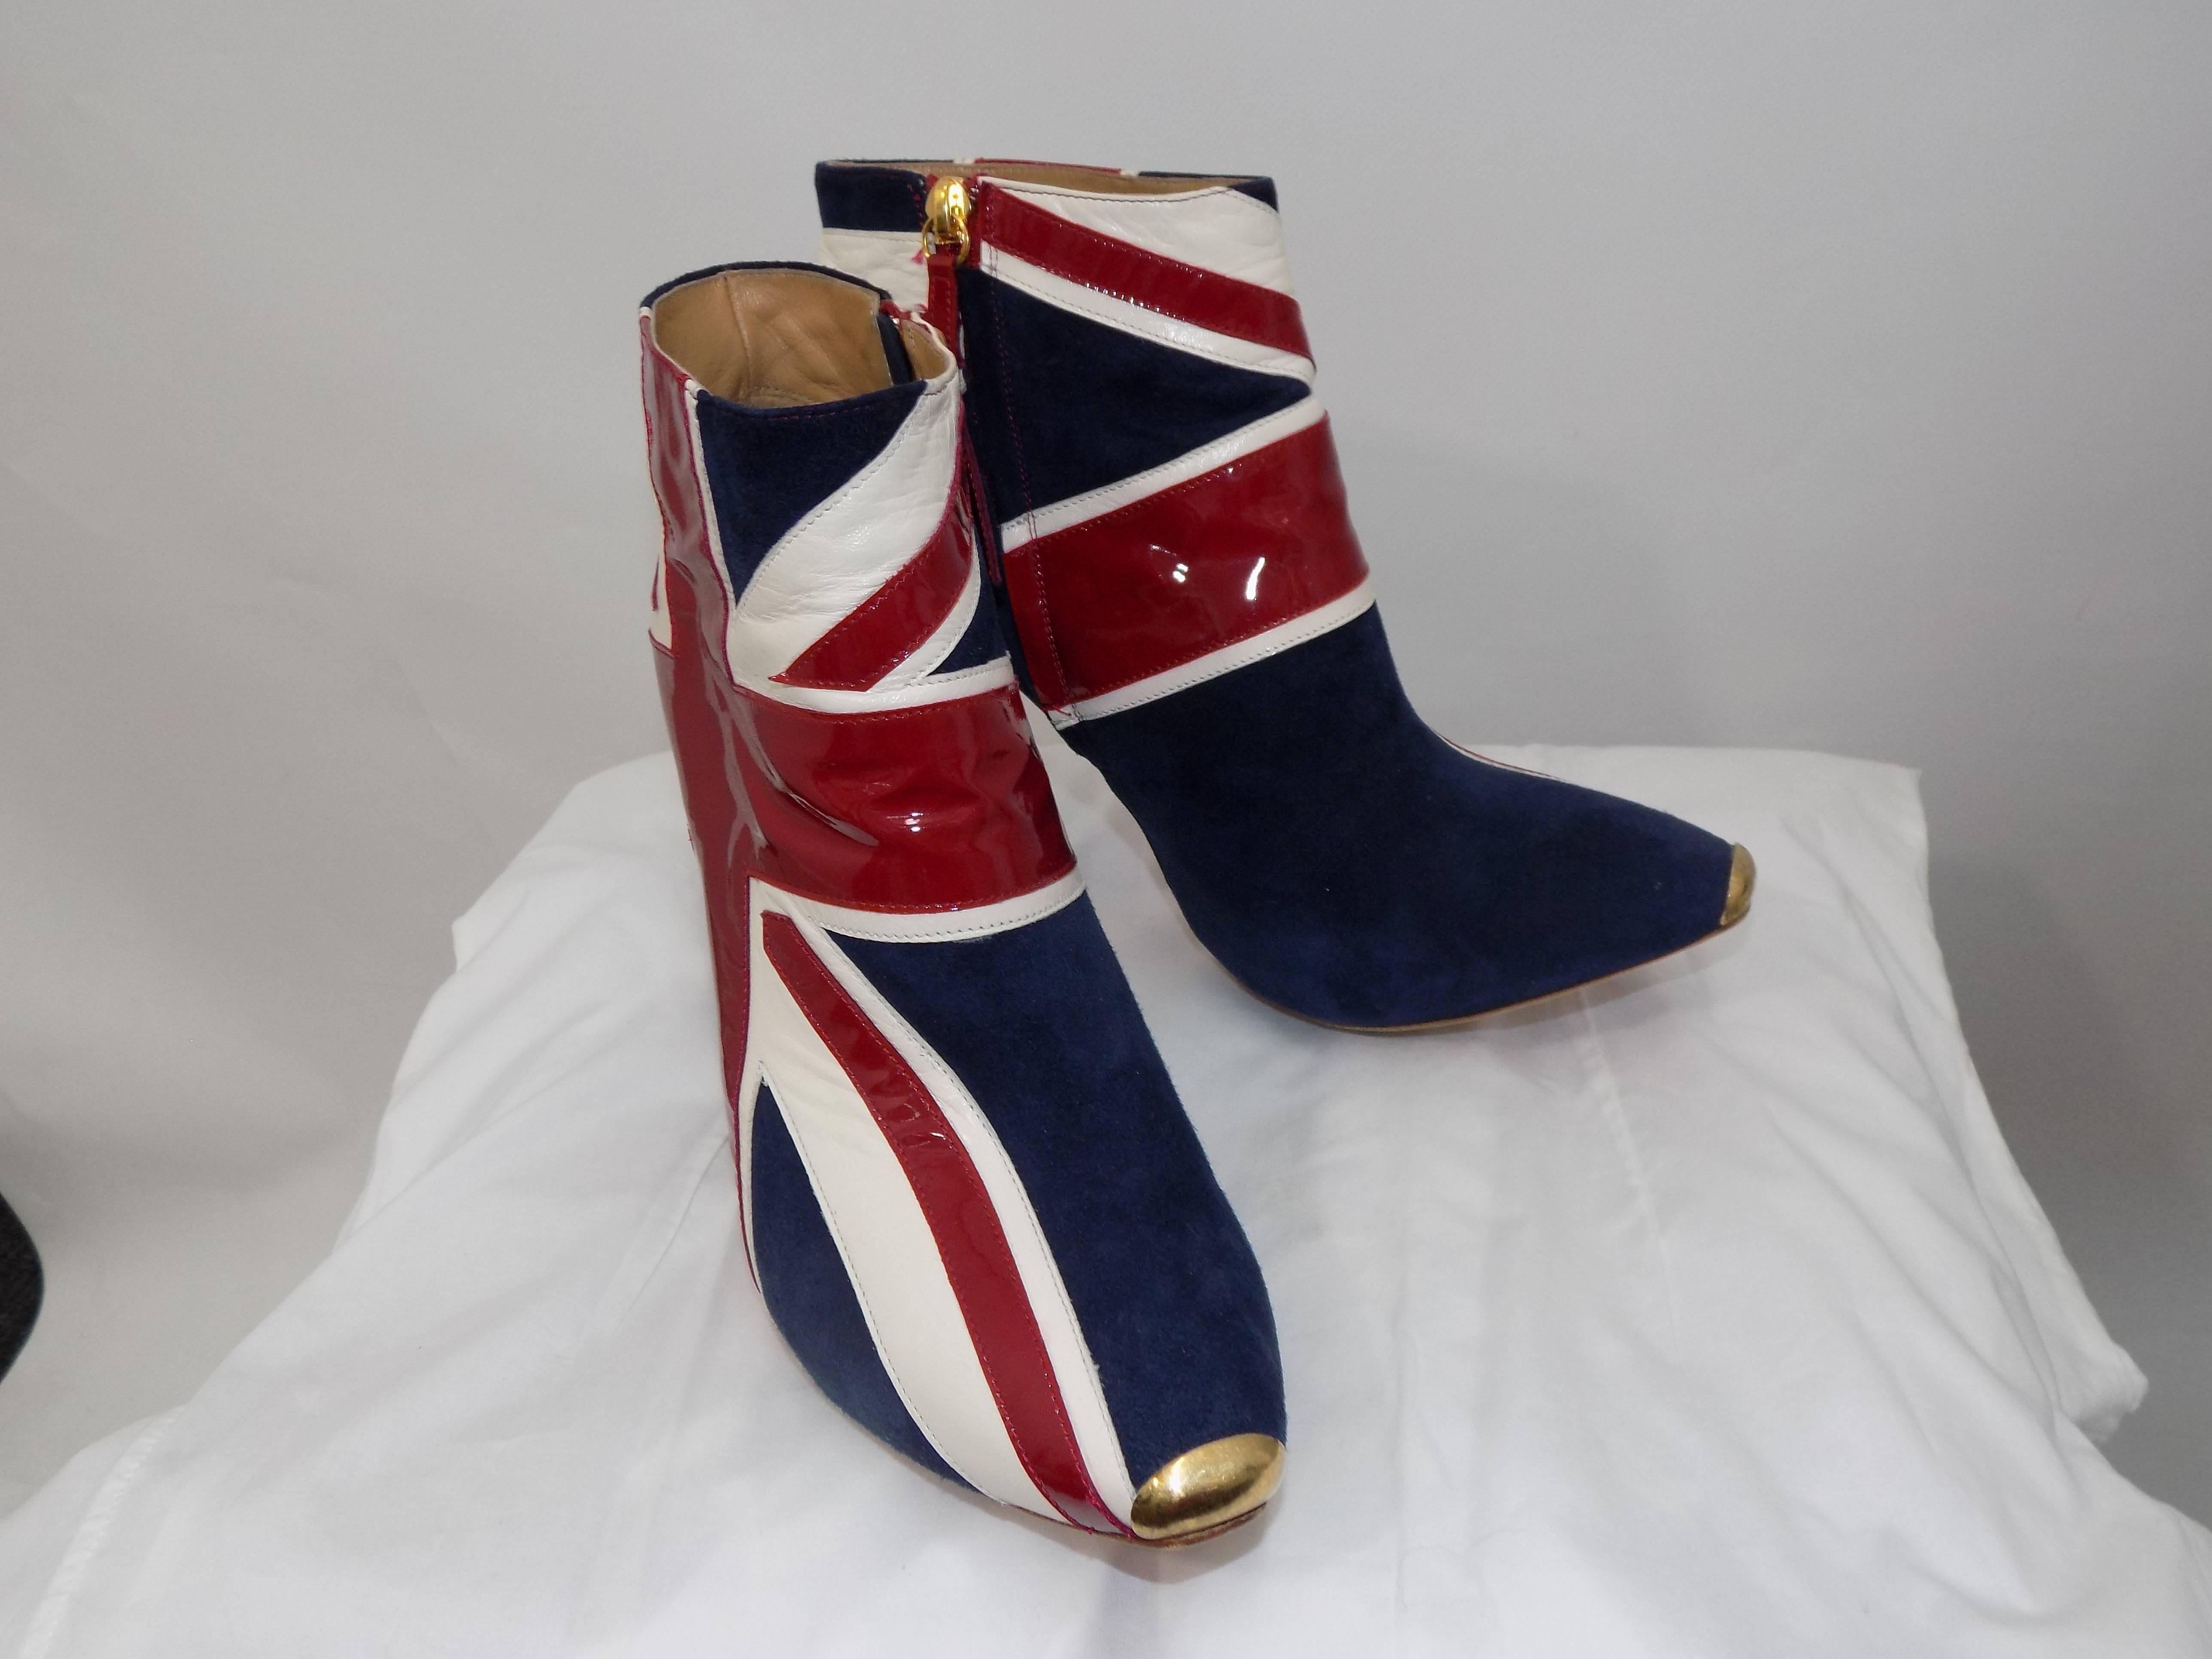 ALEXANDER MCQUEEN Union Jack ankle boots  Details Patriotic and very rock 'n' roll, wear these boots to give your look a modern punk vibe. Team them with a full skirt for a fun and flirtatious evening look.These beautiful Alexander McQueen ankle